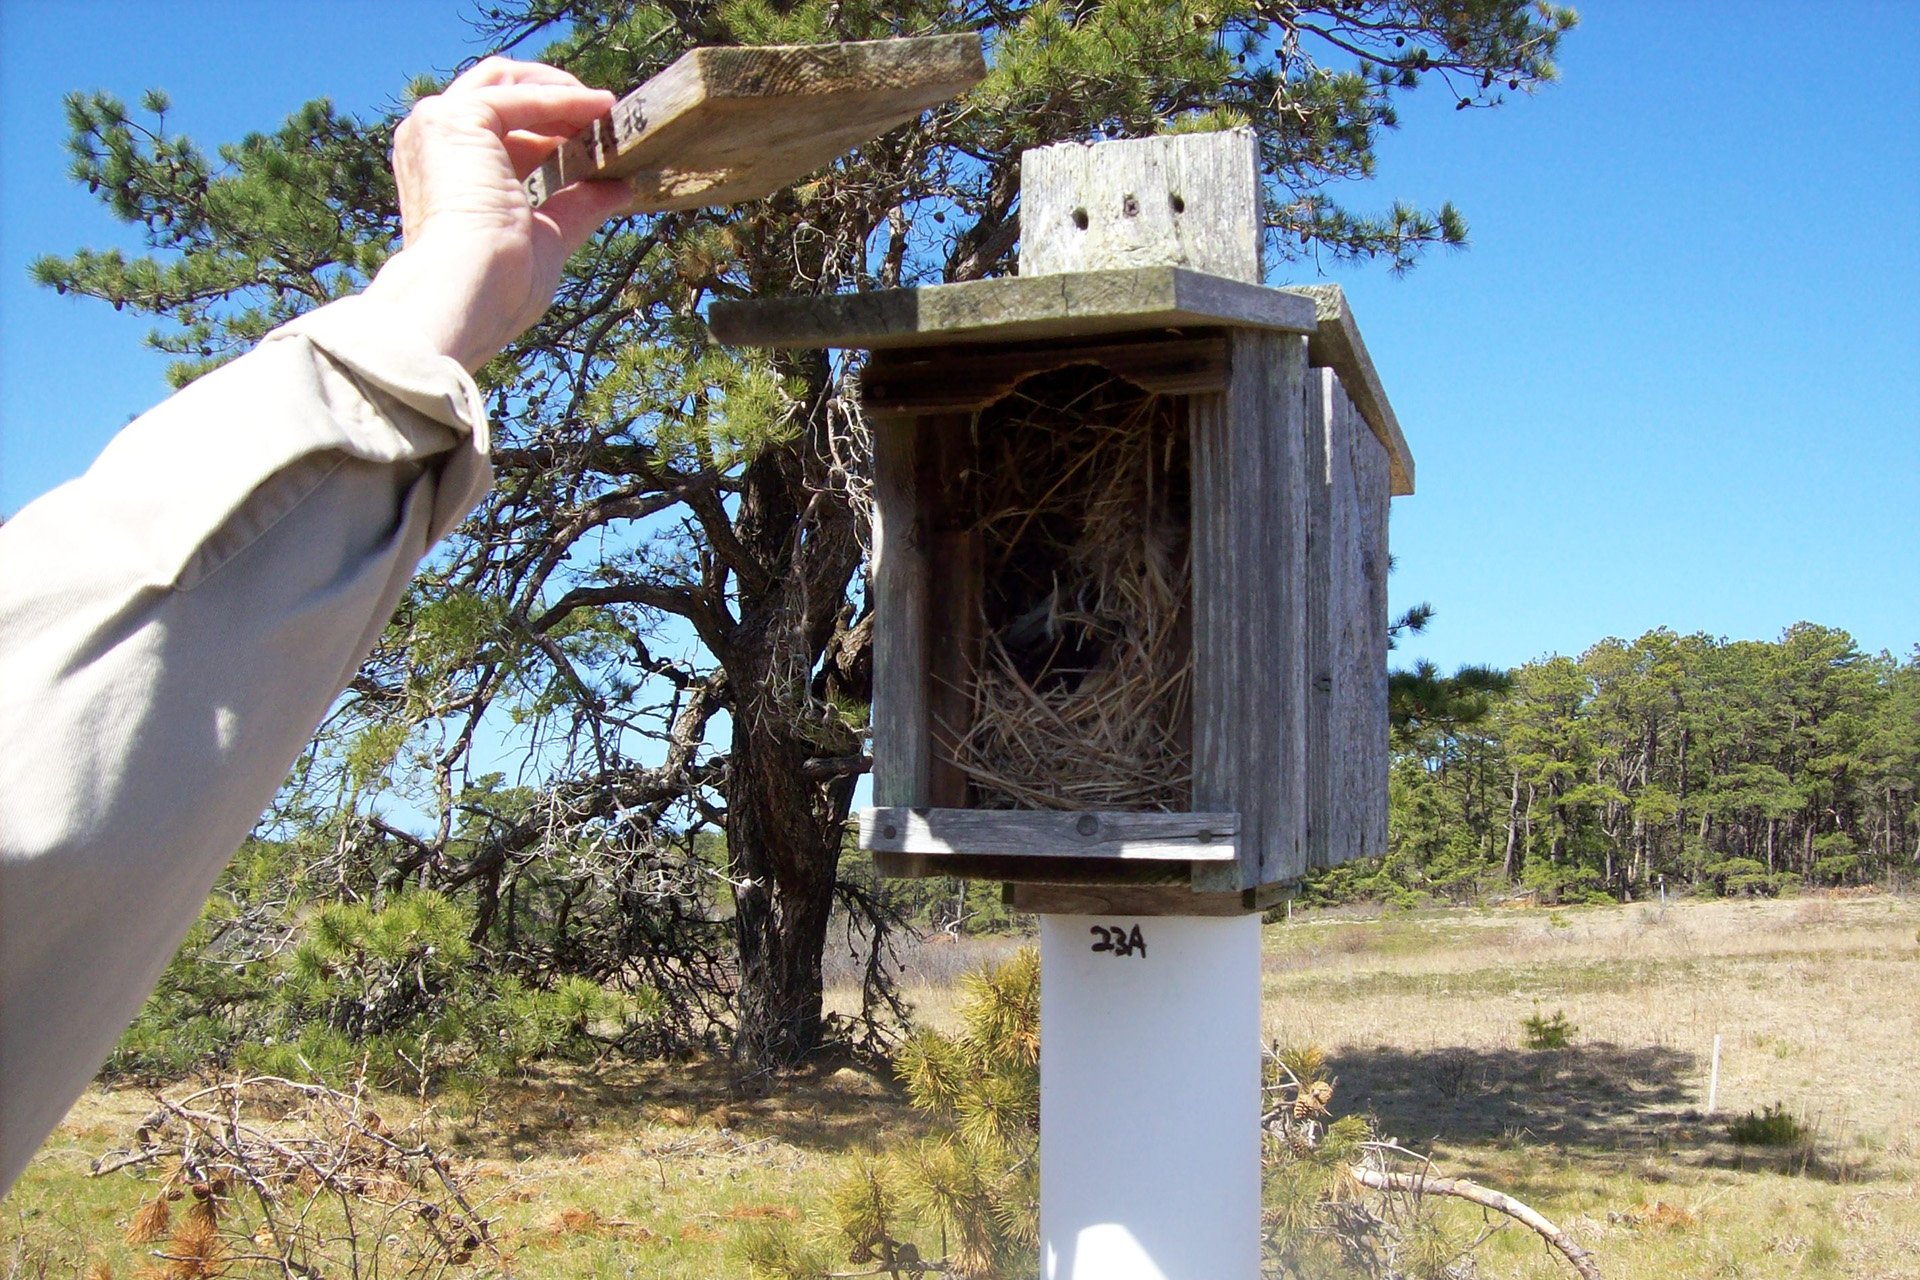 Wooden nest box with an inhabitant